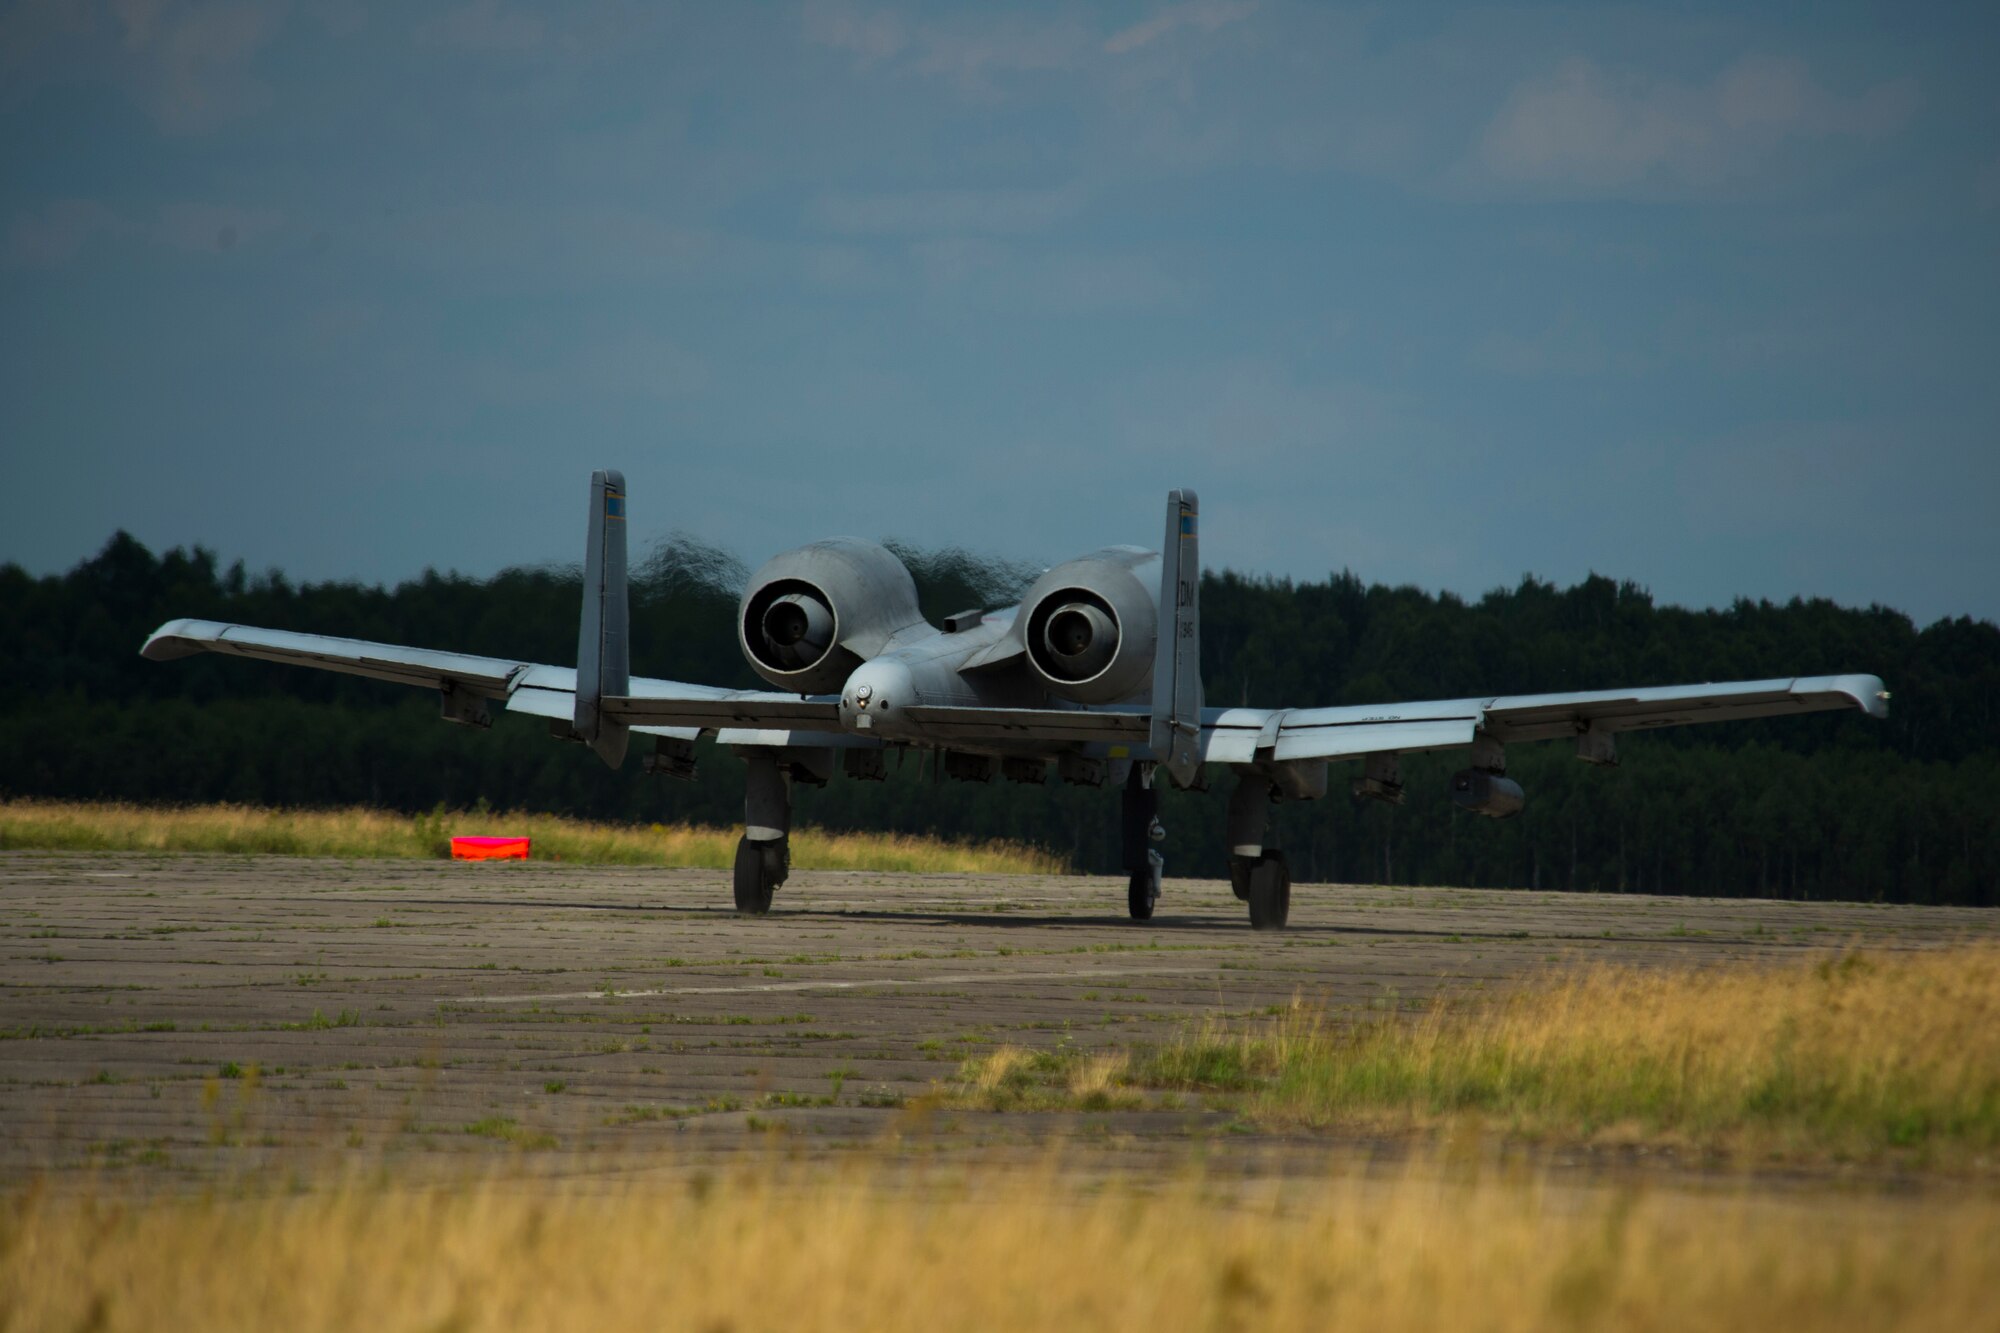 A 354th Expeditionary Fighter Squadron A-10C Thunderbolt II aircraft travels down a runway during an austere landing training exercise at Nowe Miasto, Poland, July 20, 2015. The rugged surface conditions of the runway allow pilots to closely simulate landing conditions in a deployed environment. (U.S. Air Force photo by Airman 1st Class Luke Kitterman/Released)